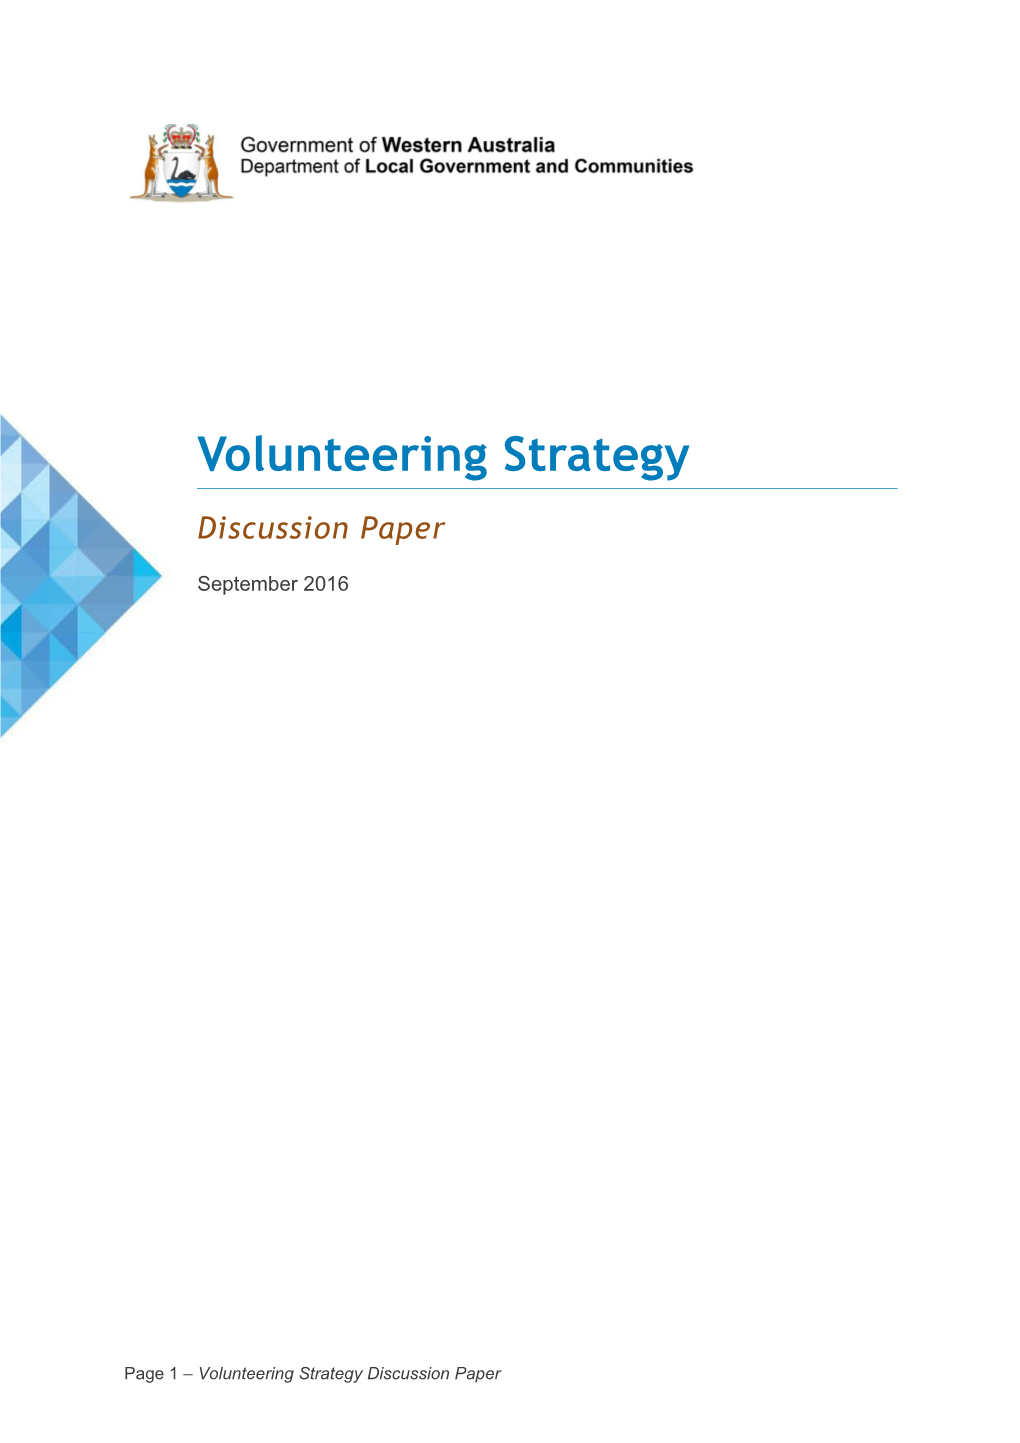 Volunteering Strategy Discussion Paper